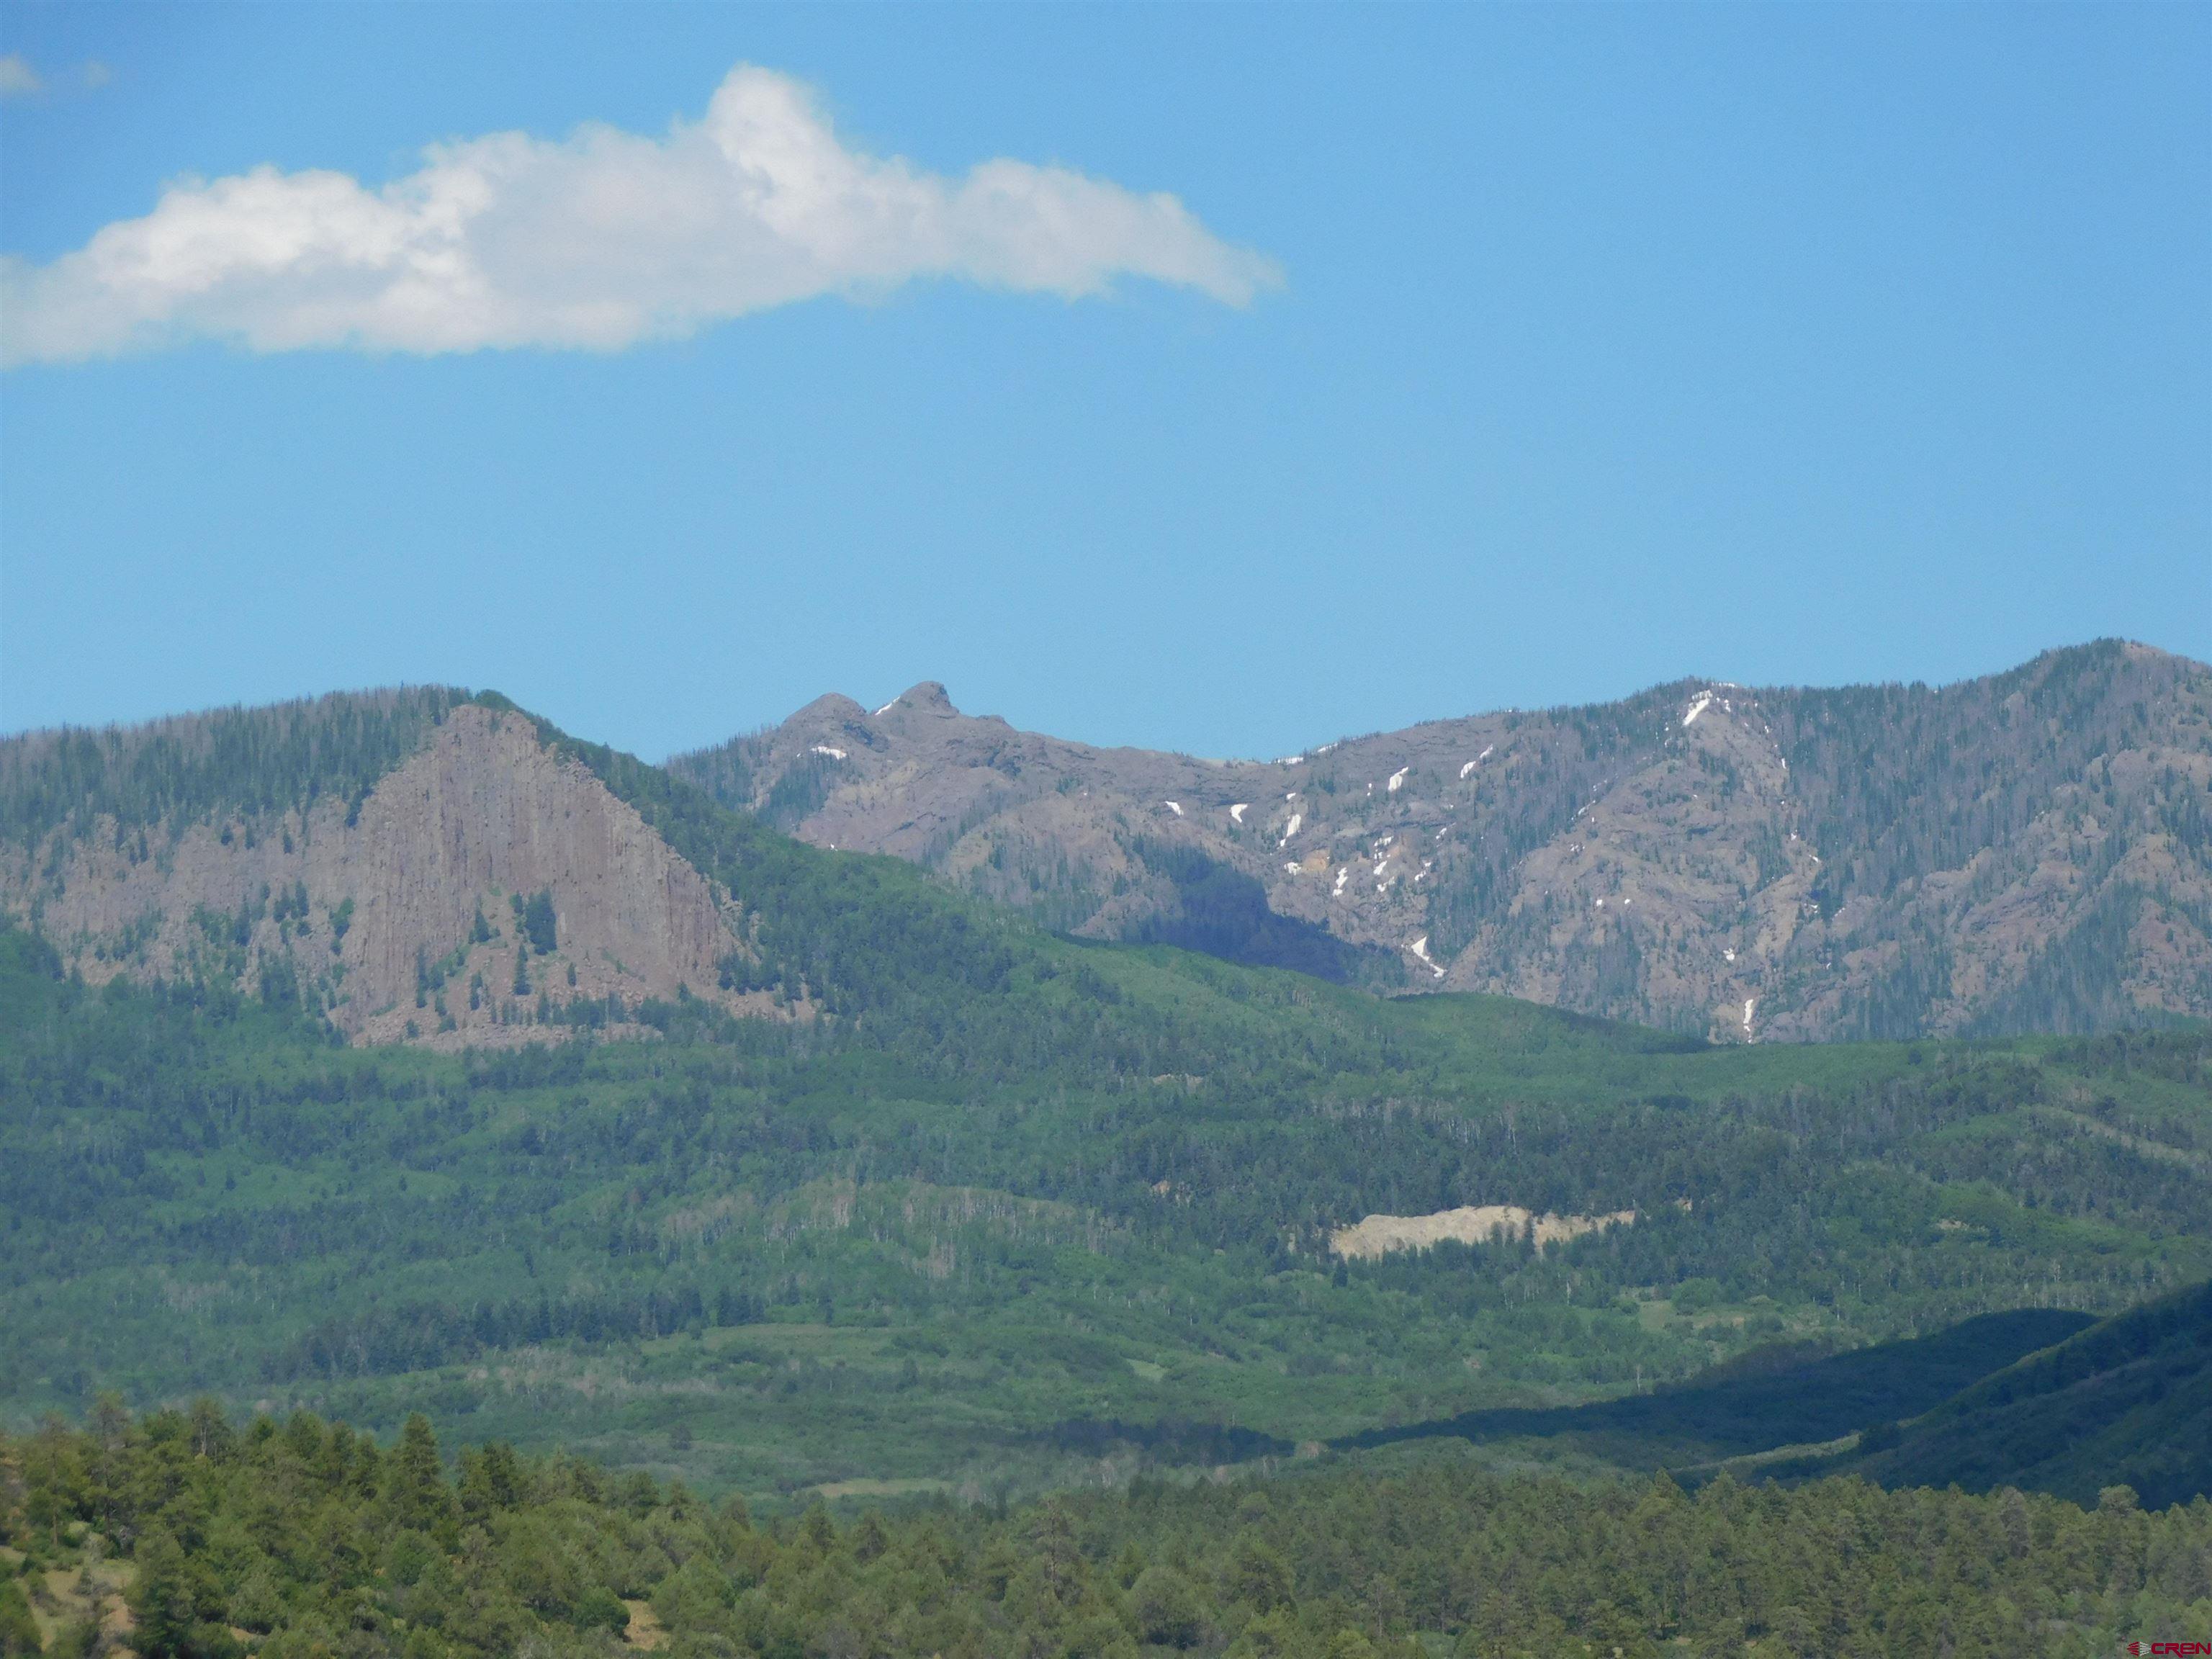 a view of a mountain in the distance